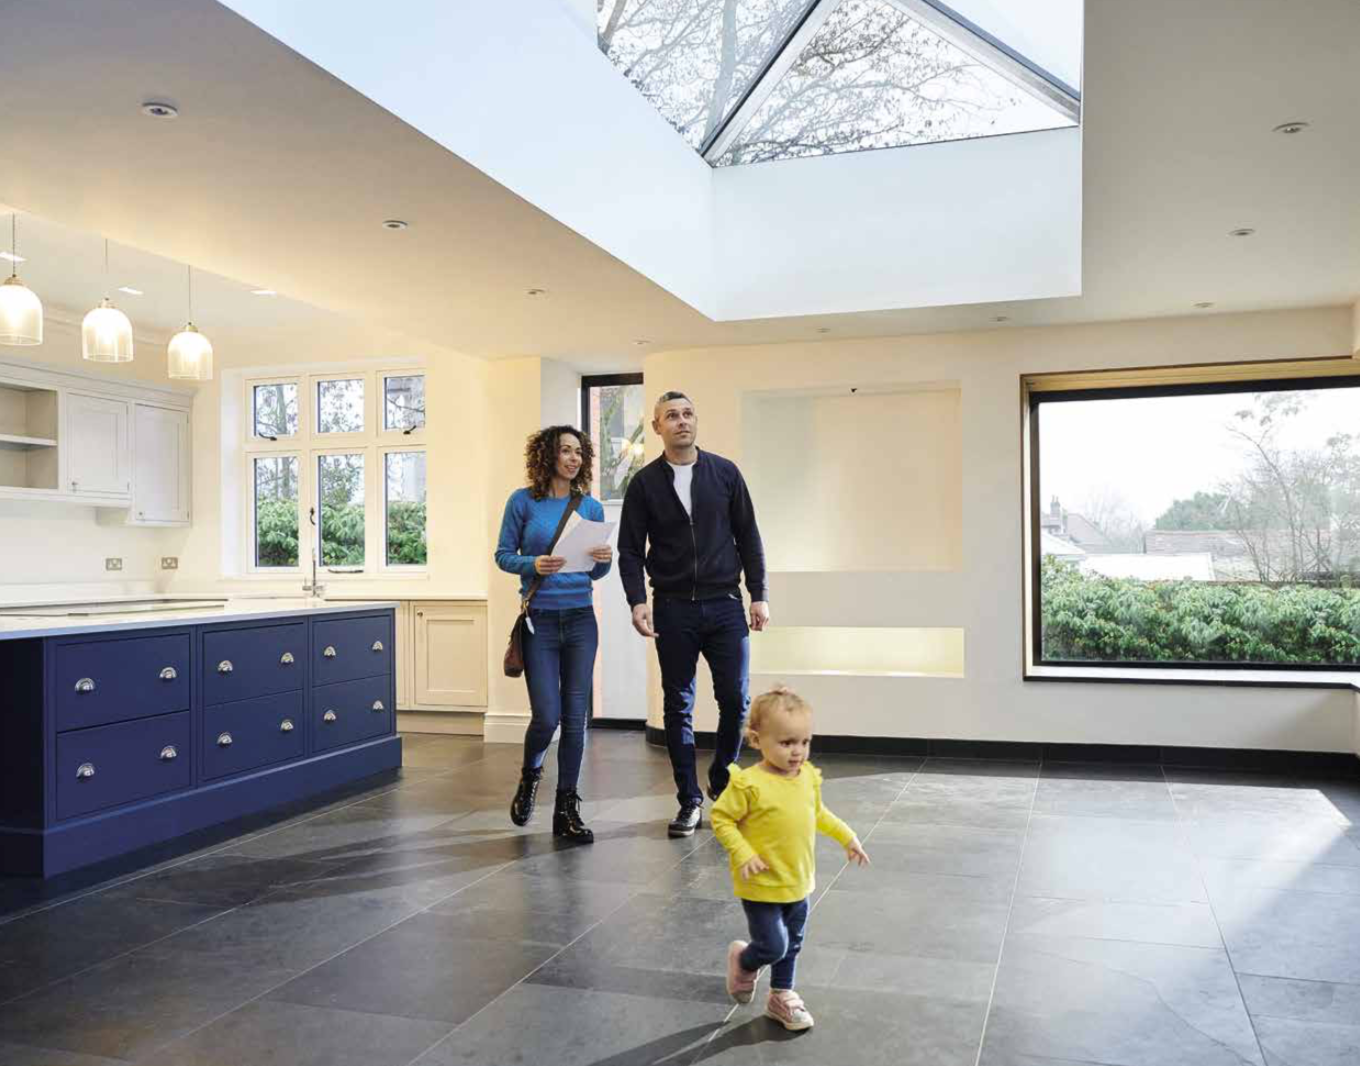 Why Our Guardian Roof Lantern Is the Perfect Addition to Your Interiors